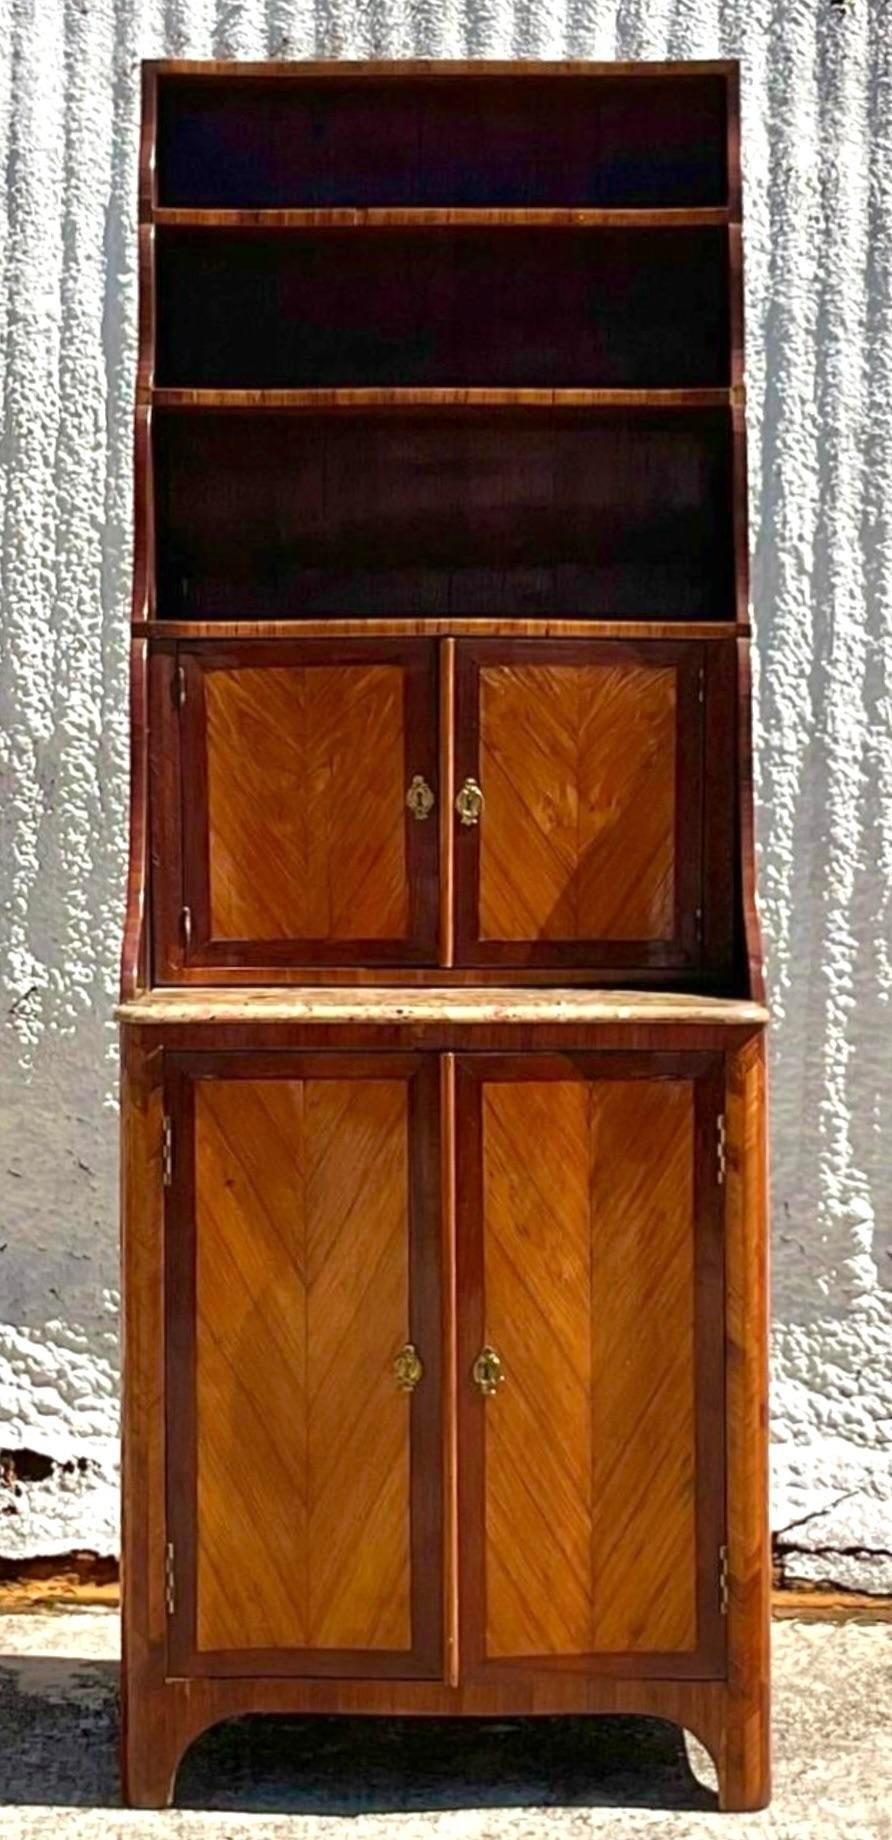 Late 19th Century Regency Chevron Inlay Cascading Cabinet In Good Condition For Sale In west palm beach, FL